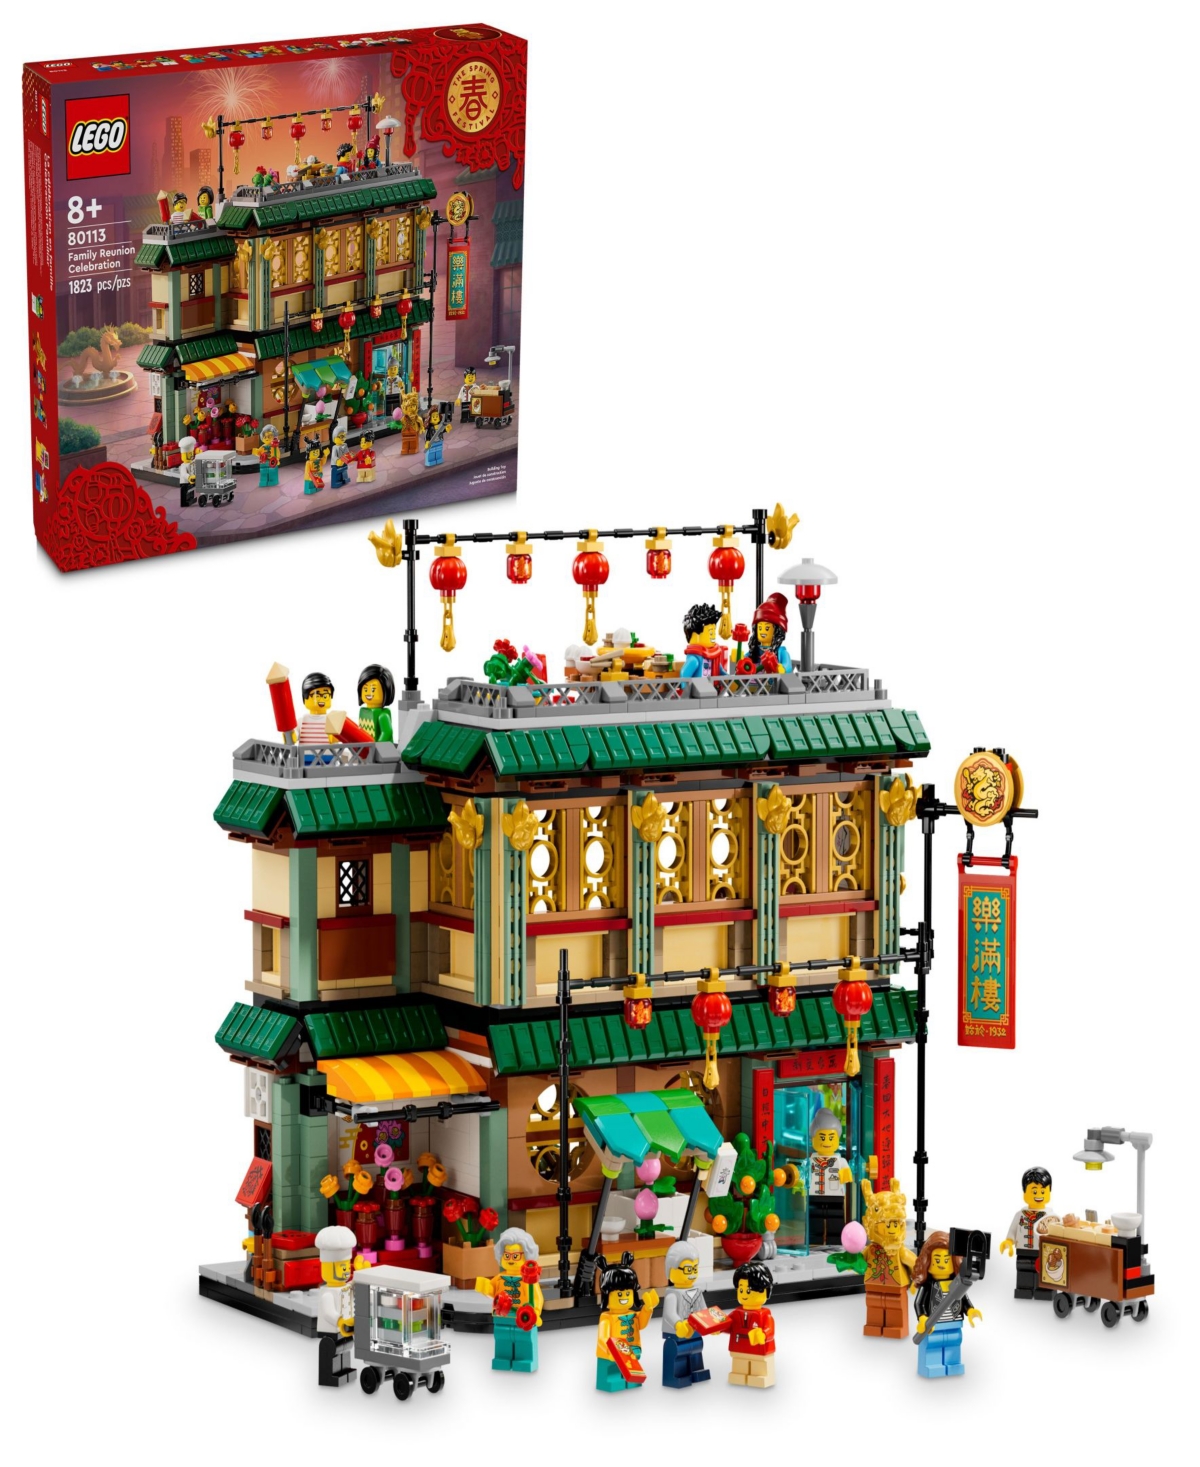 Lego Spring Festival Family Reunion Celebration Building Toy For Kids 80113, 1823 Pieces In Multicolor